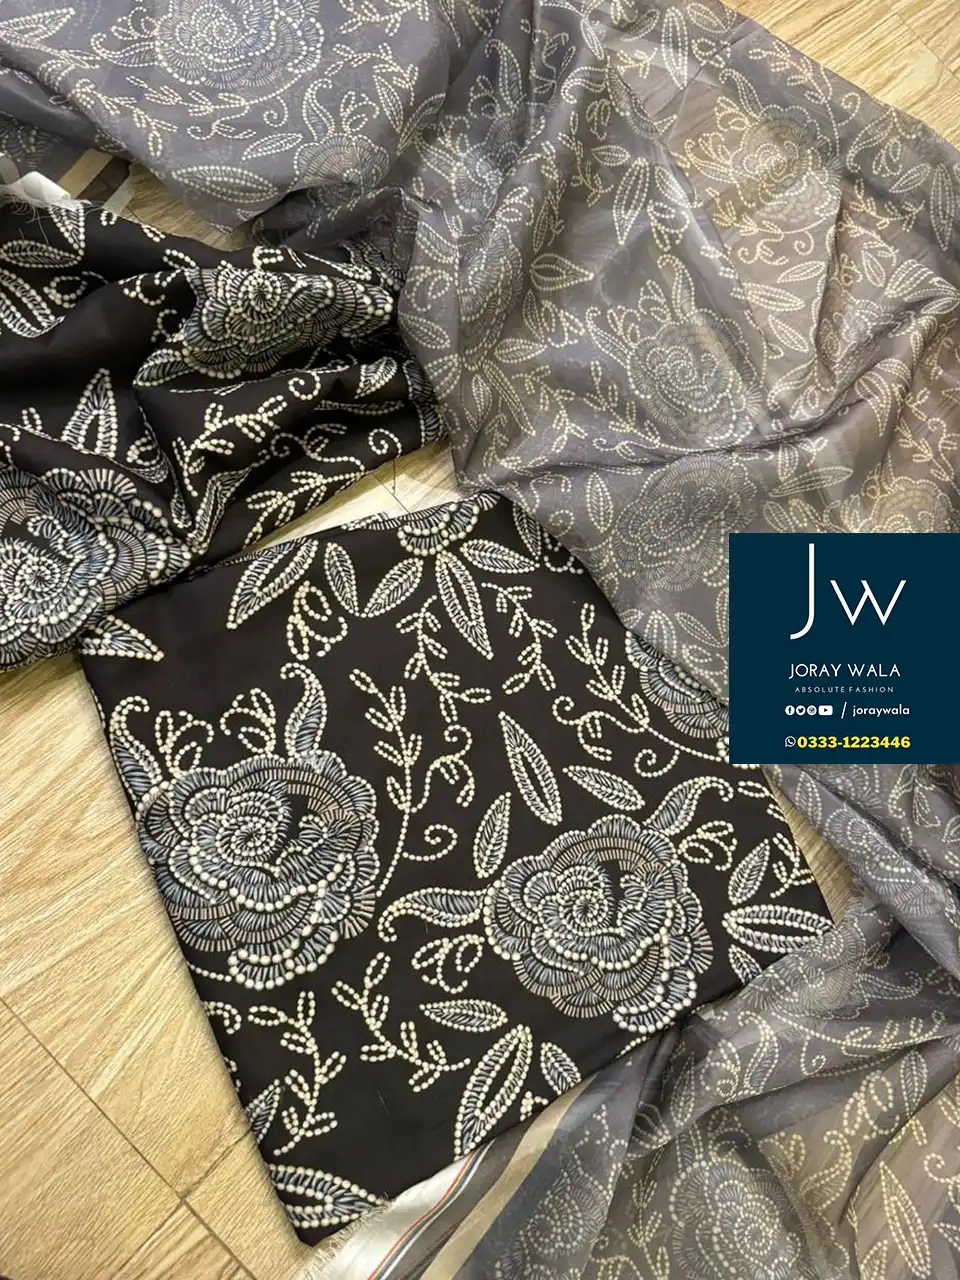 Digital Printed Swiss lawn with silk dupatta D43 available at joraywala with free delivery